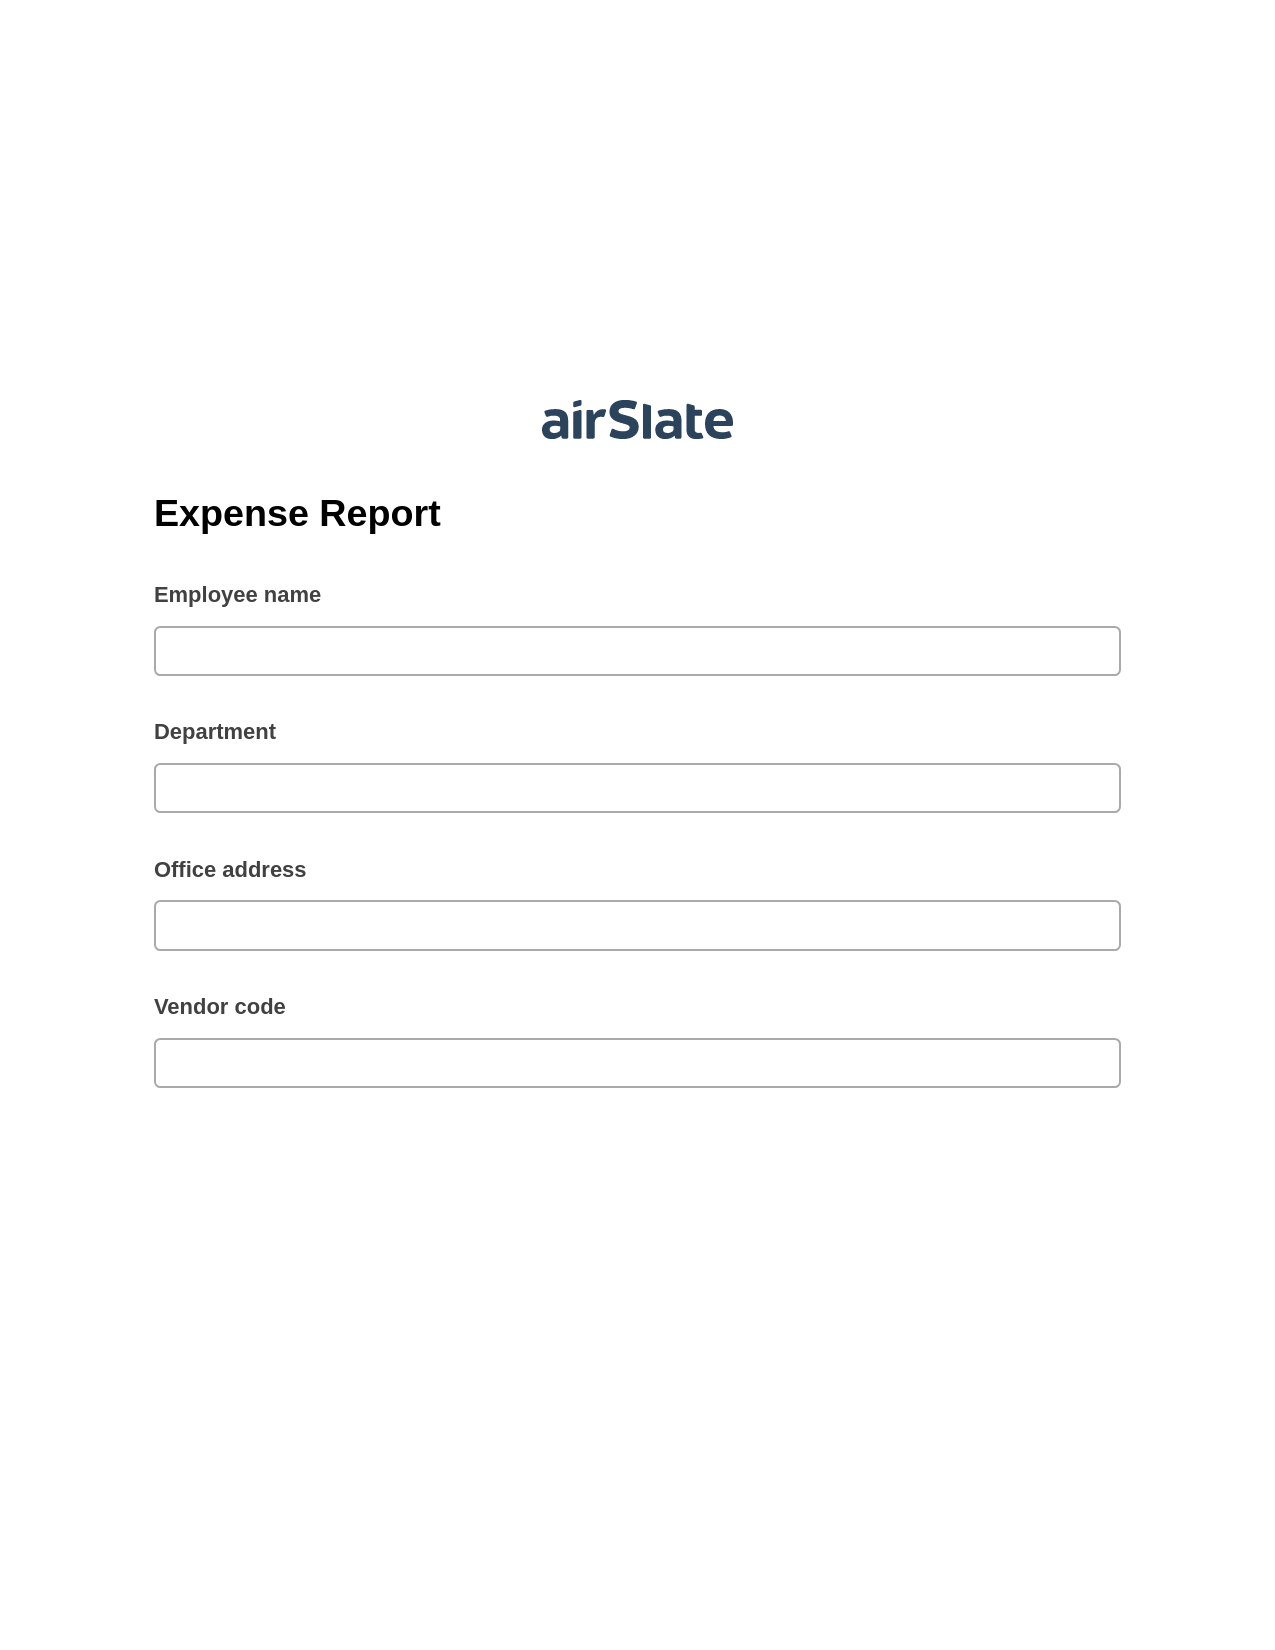 Expense Report Pre-fill from CSV File Bot, Reminder Bot, Export to NetSuite Record Bot